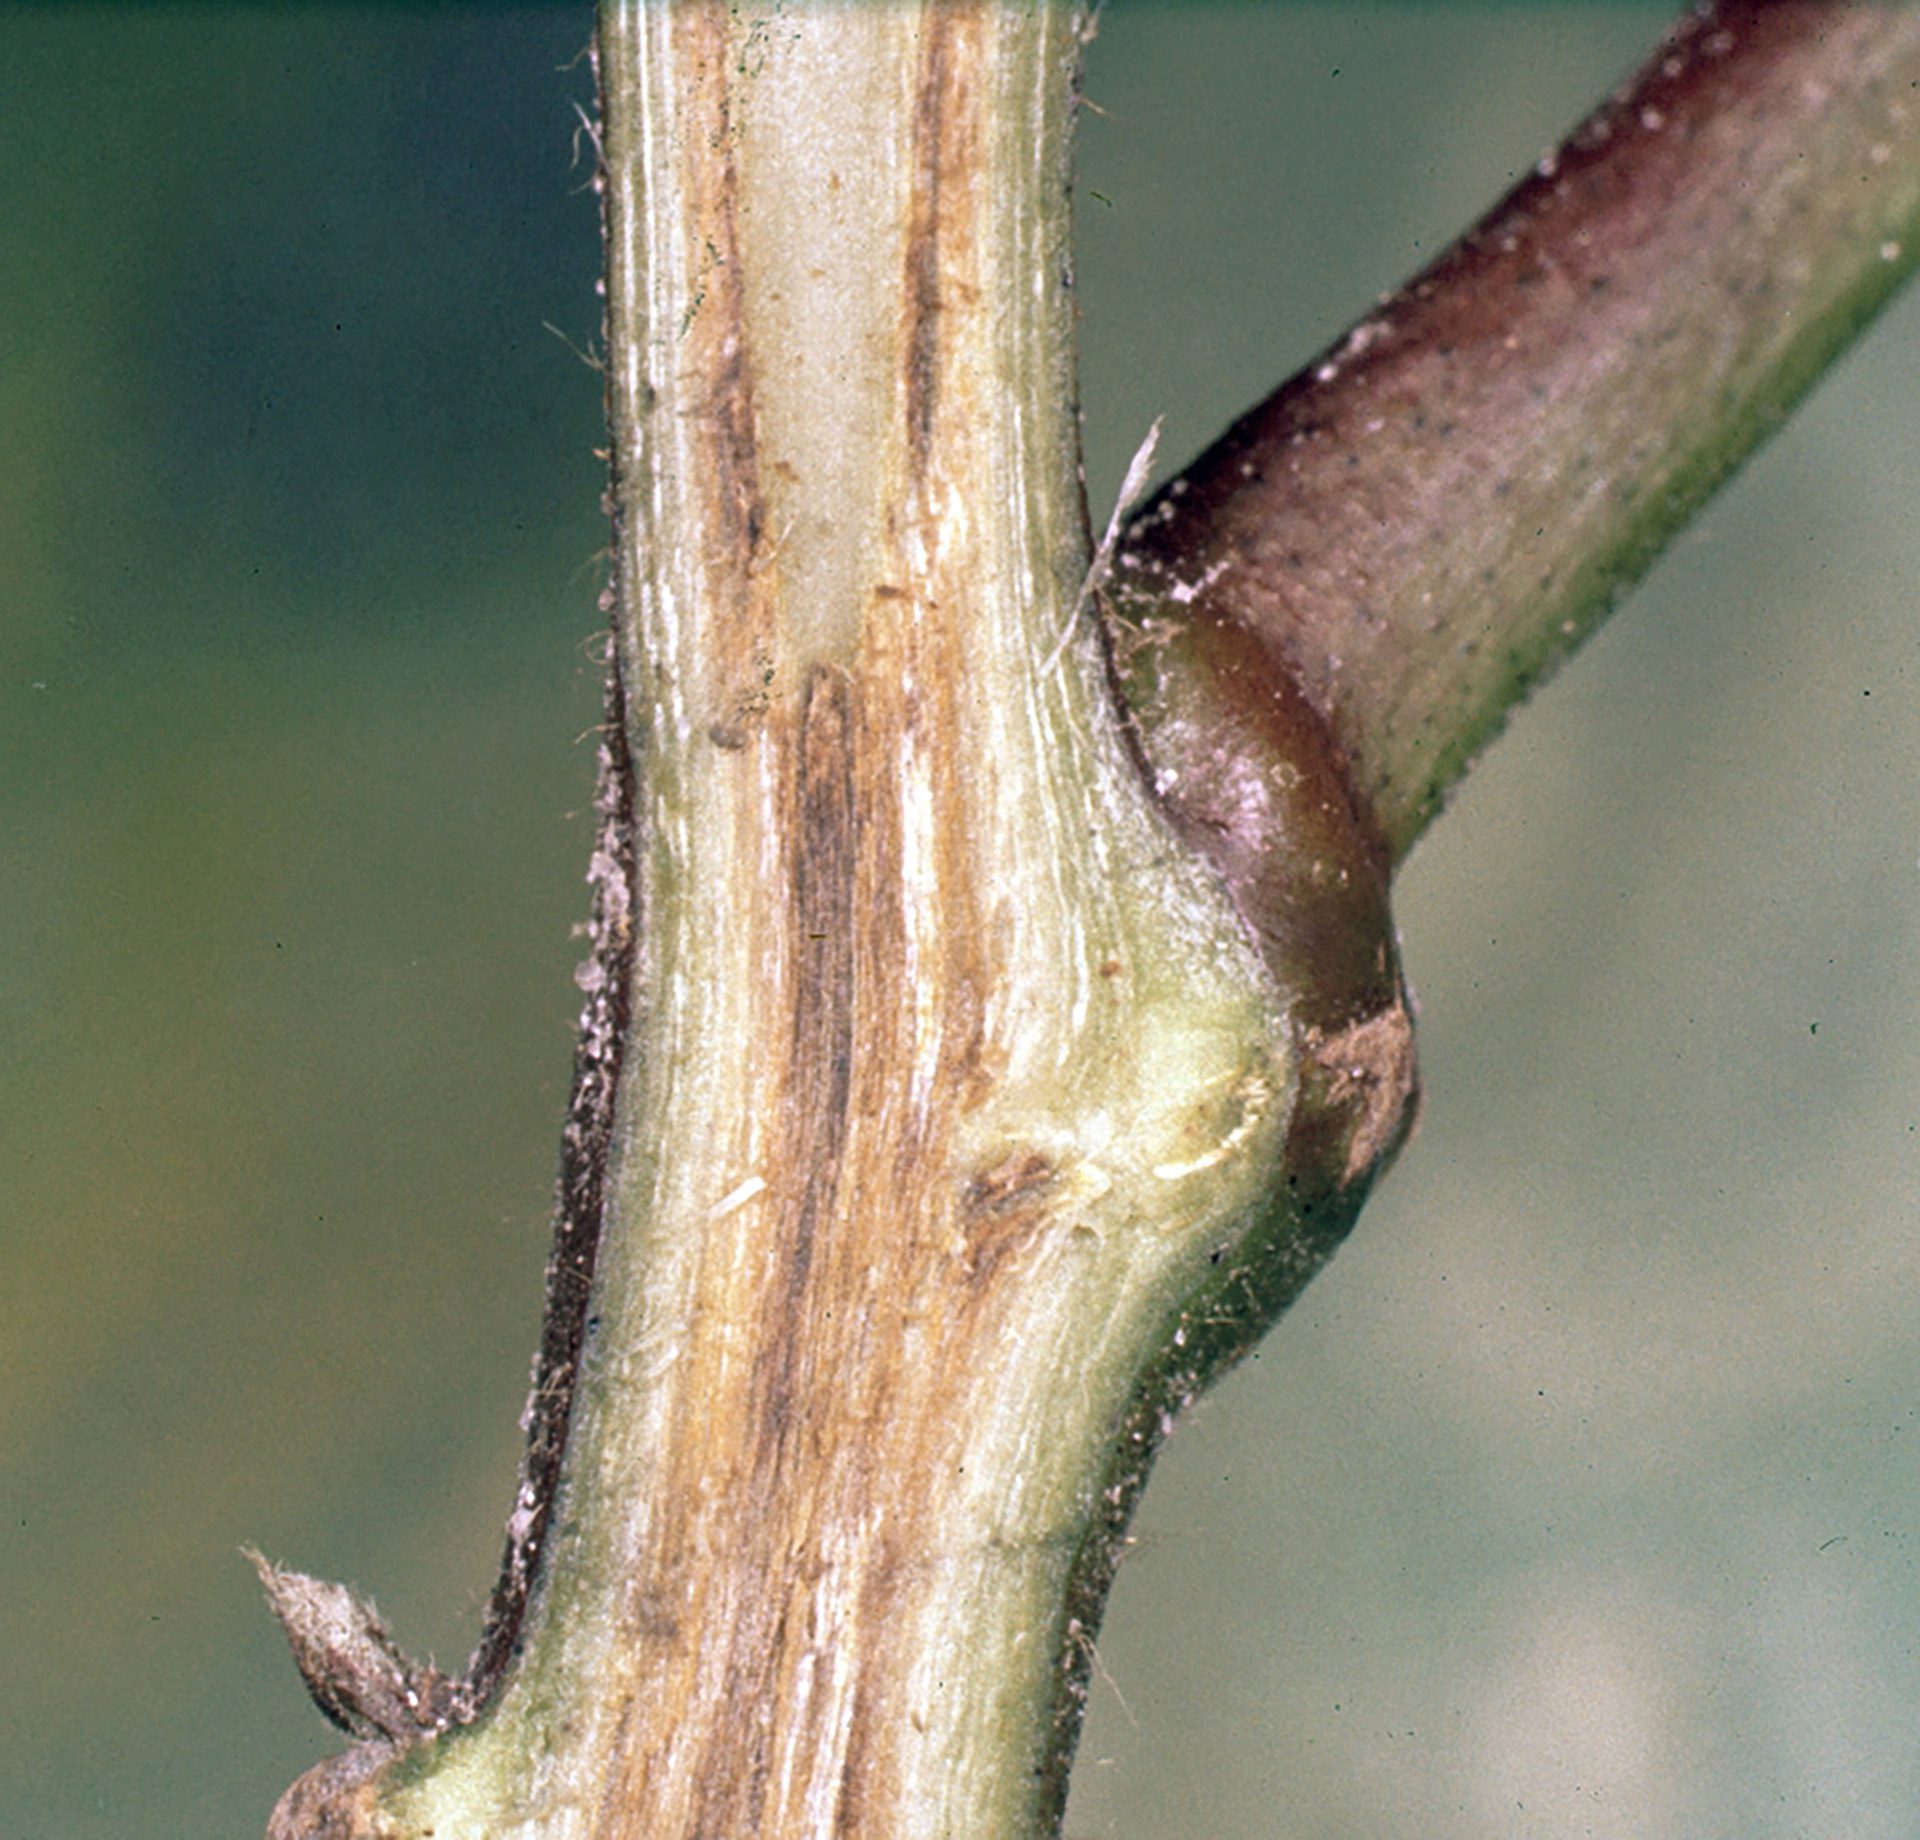 Symptoms of FOV4 on Upland cotton include dark and continuous vascular staining on roots.